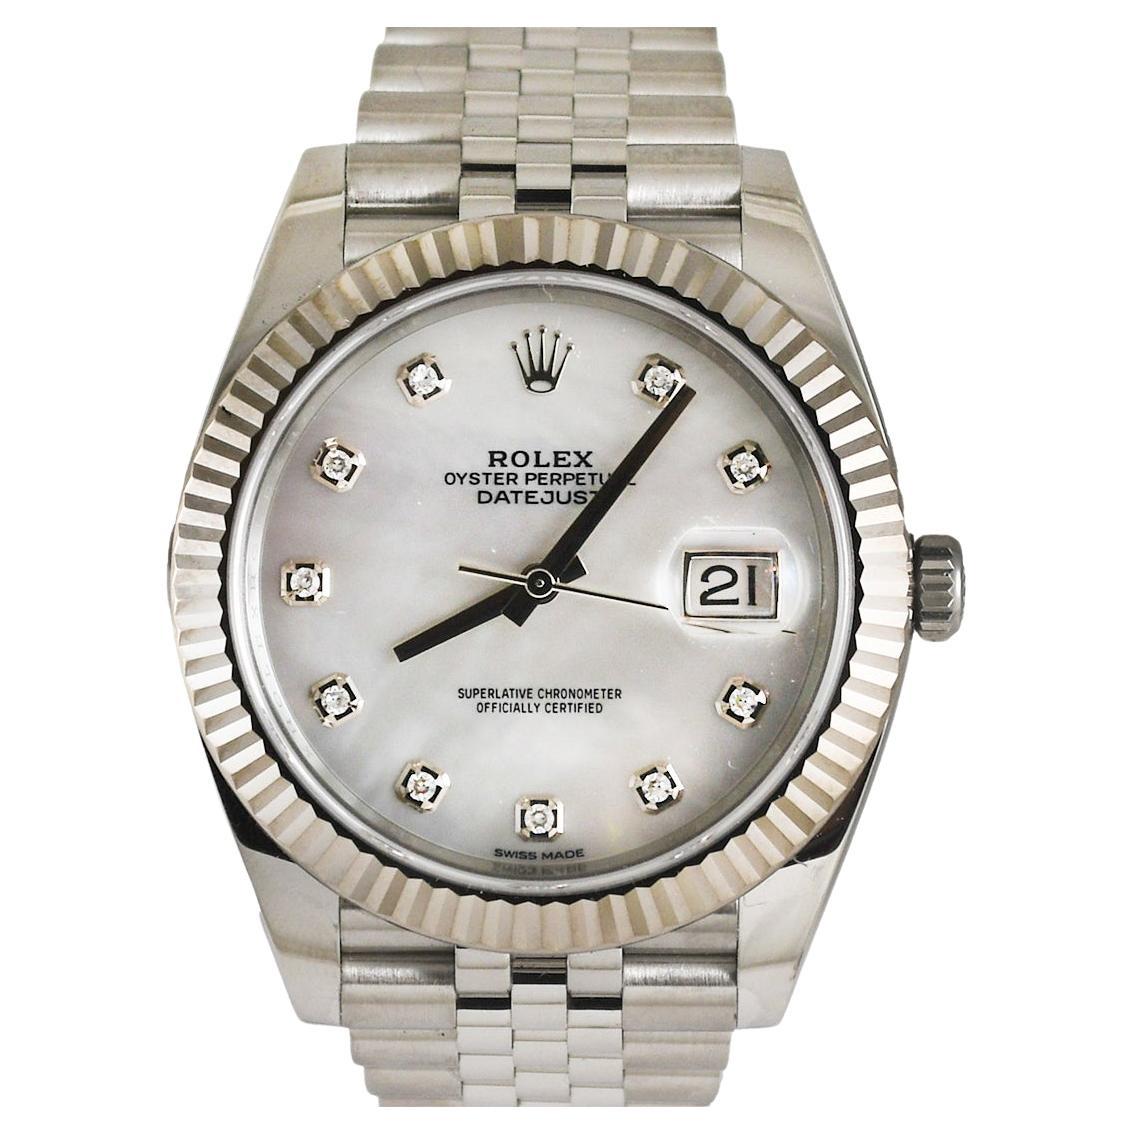 Men's Rolex Datejust Stainless Steel Mother of Pearl & Diamond Dial (41mm)